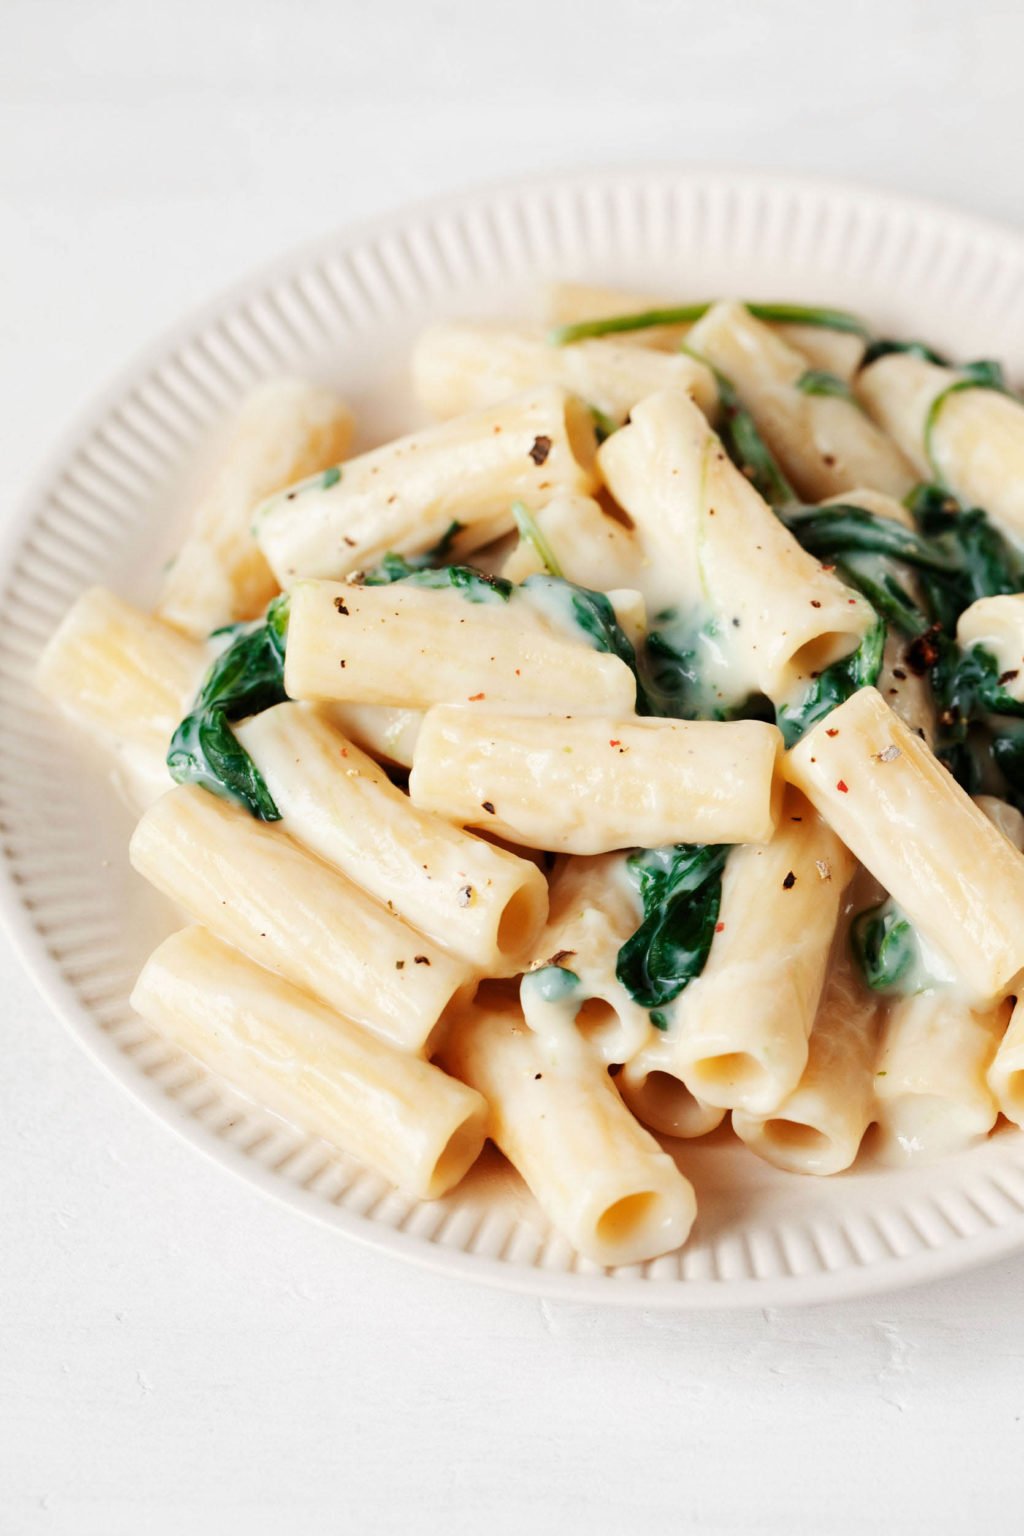 A rimmed, cream colored ceramic dish holds a creamy pasta dish with spinach.